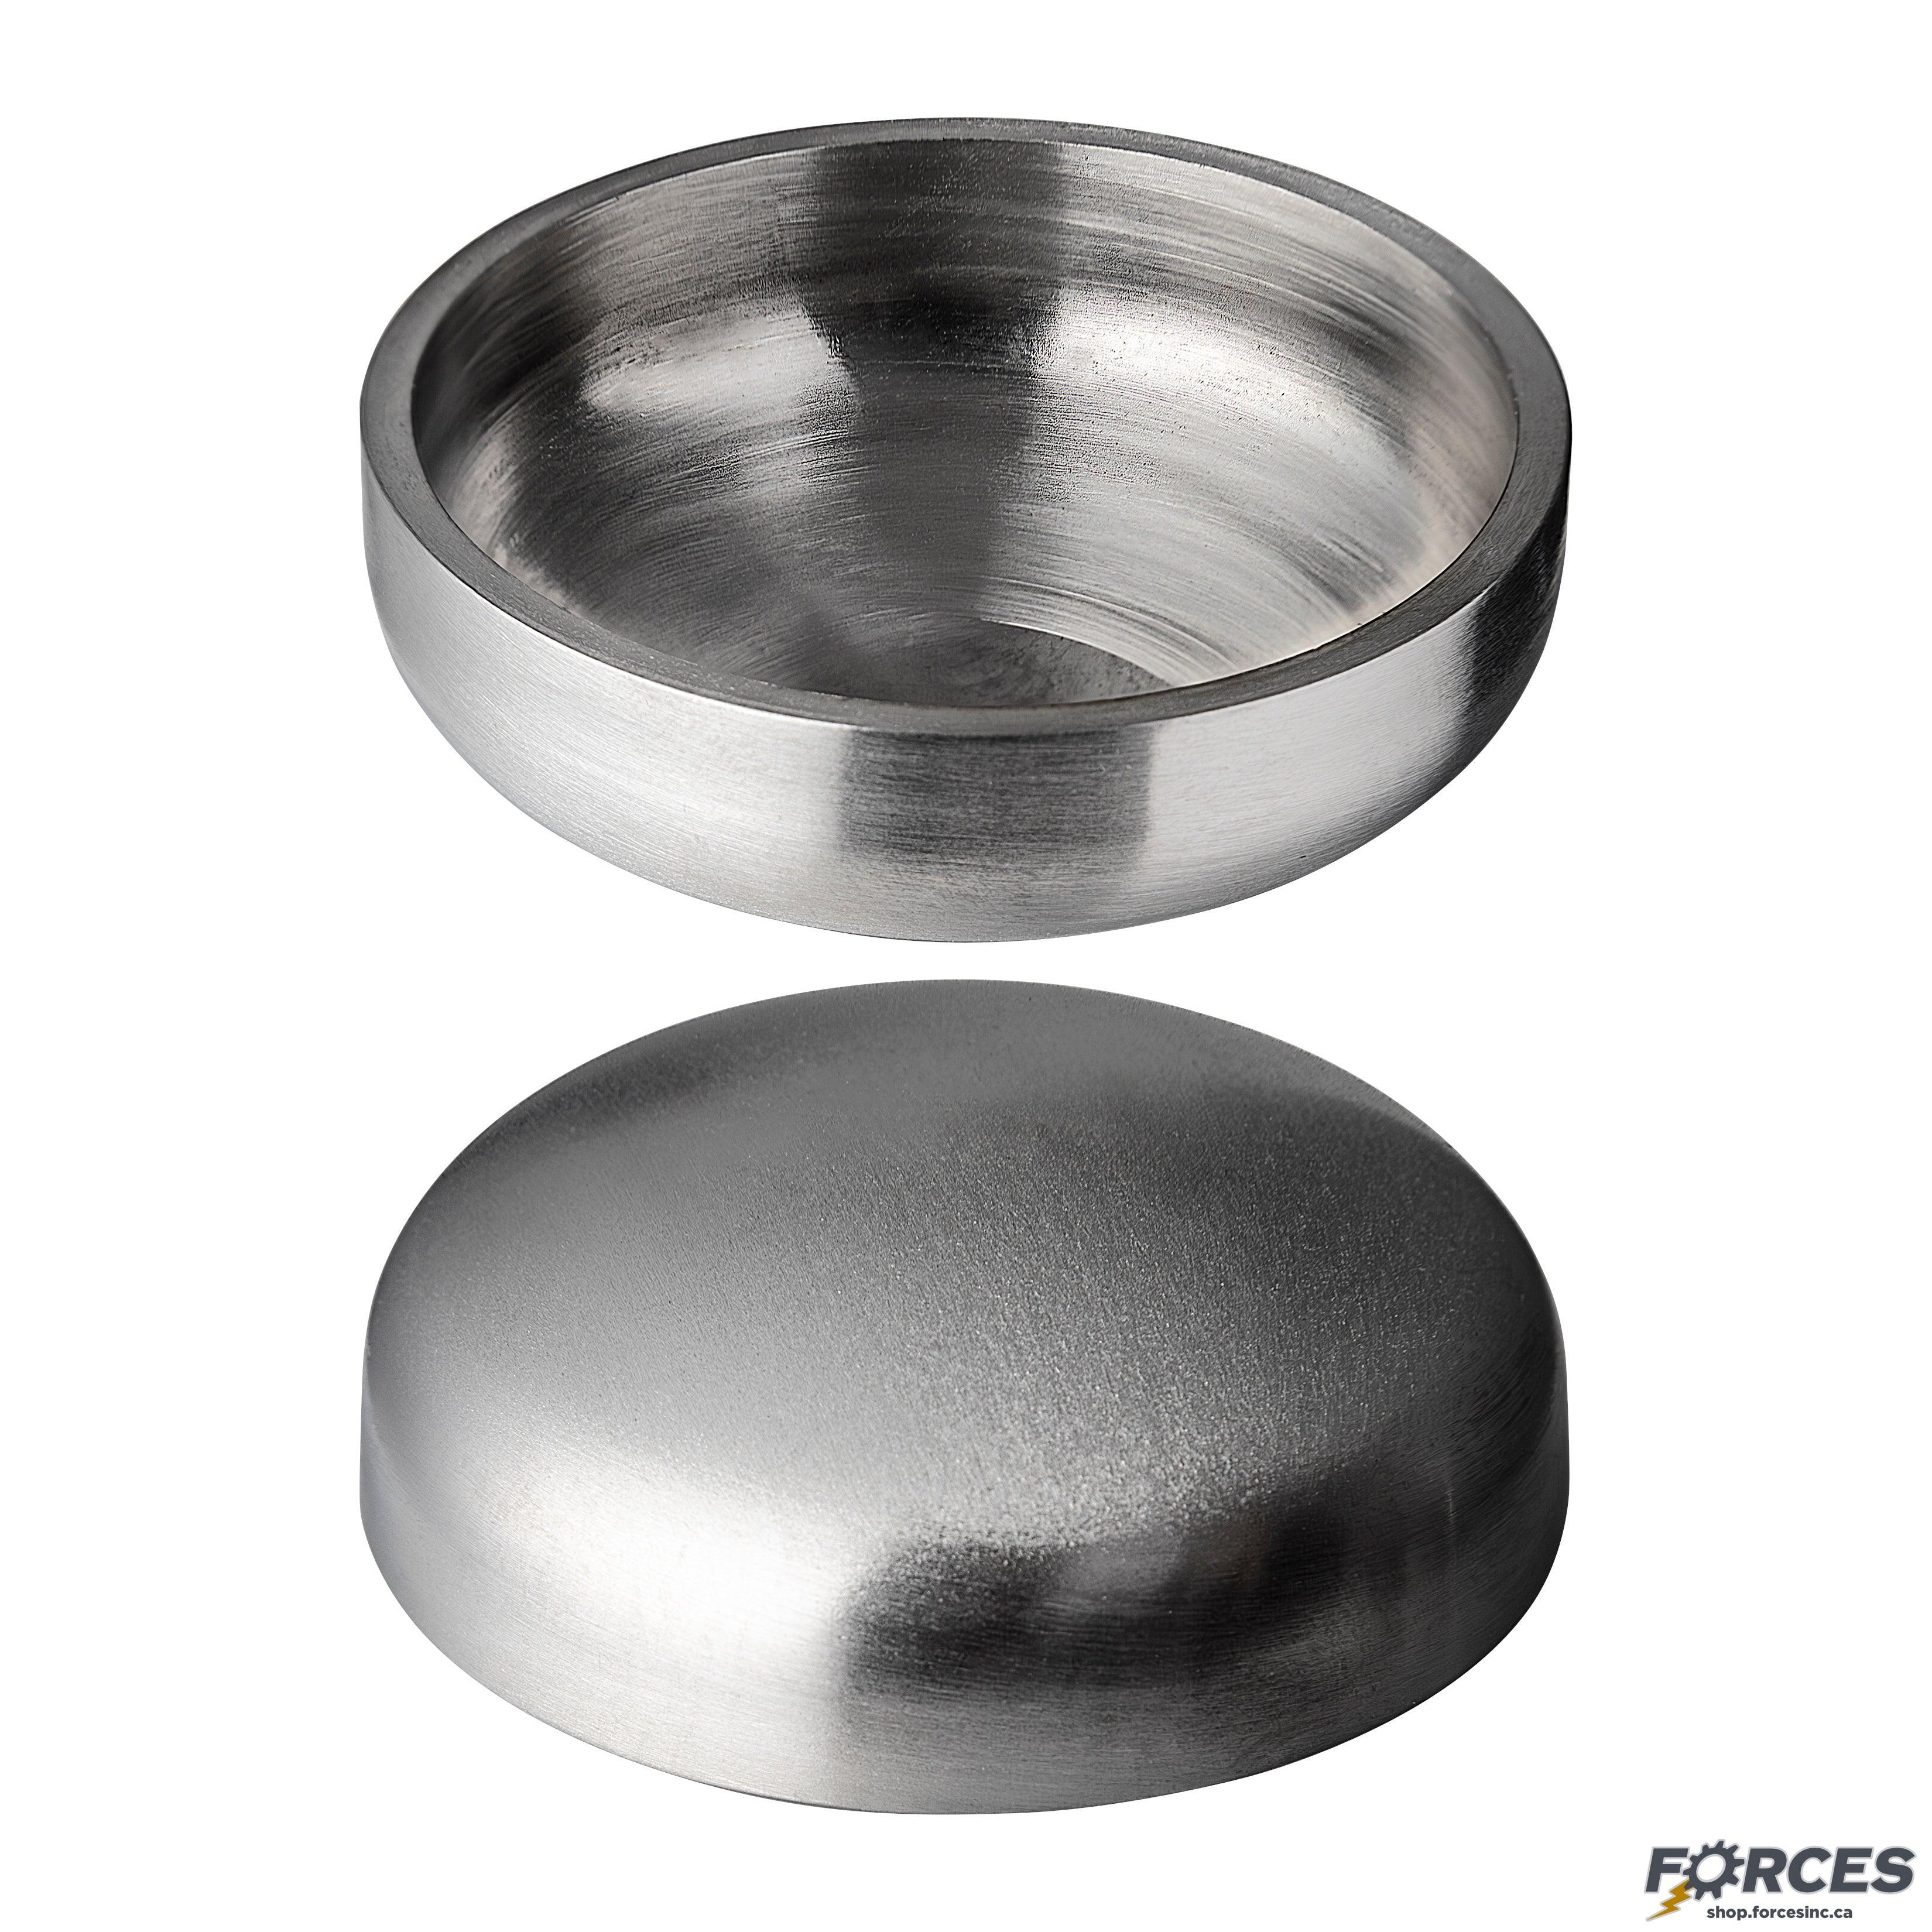 12" Butt Weld End Cap 16W - Stainless Steel 316 - Forces Inc